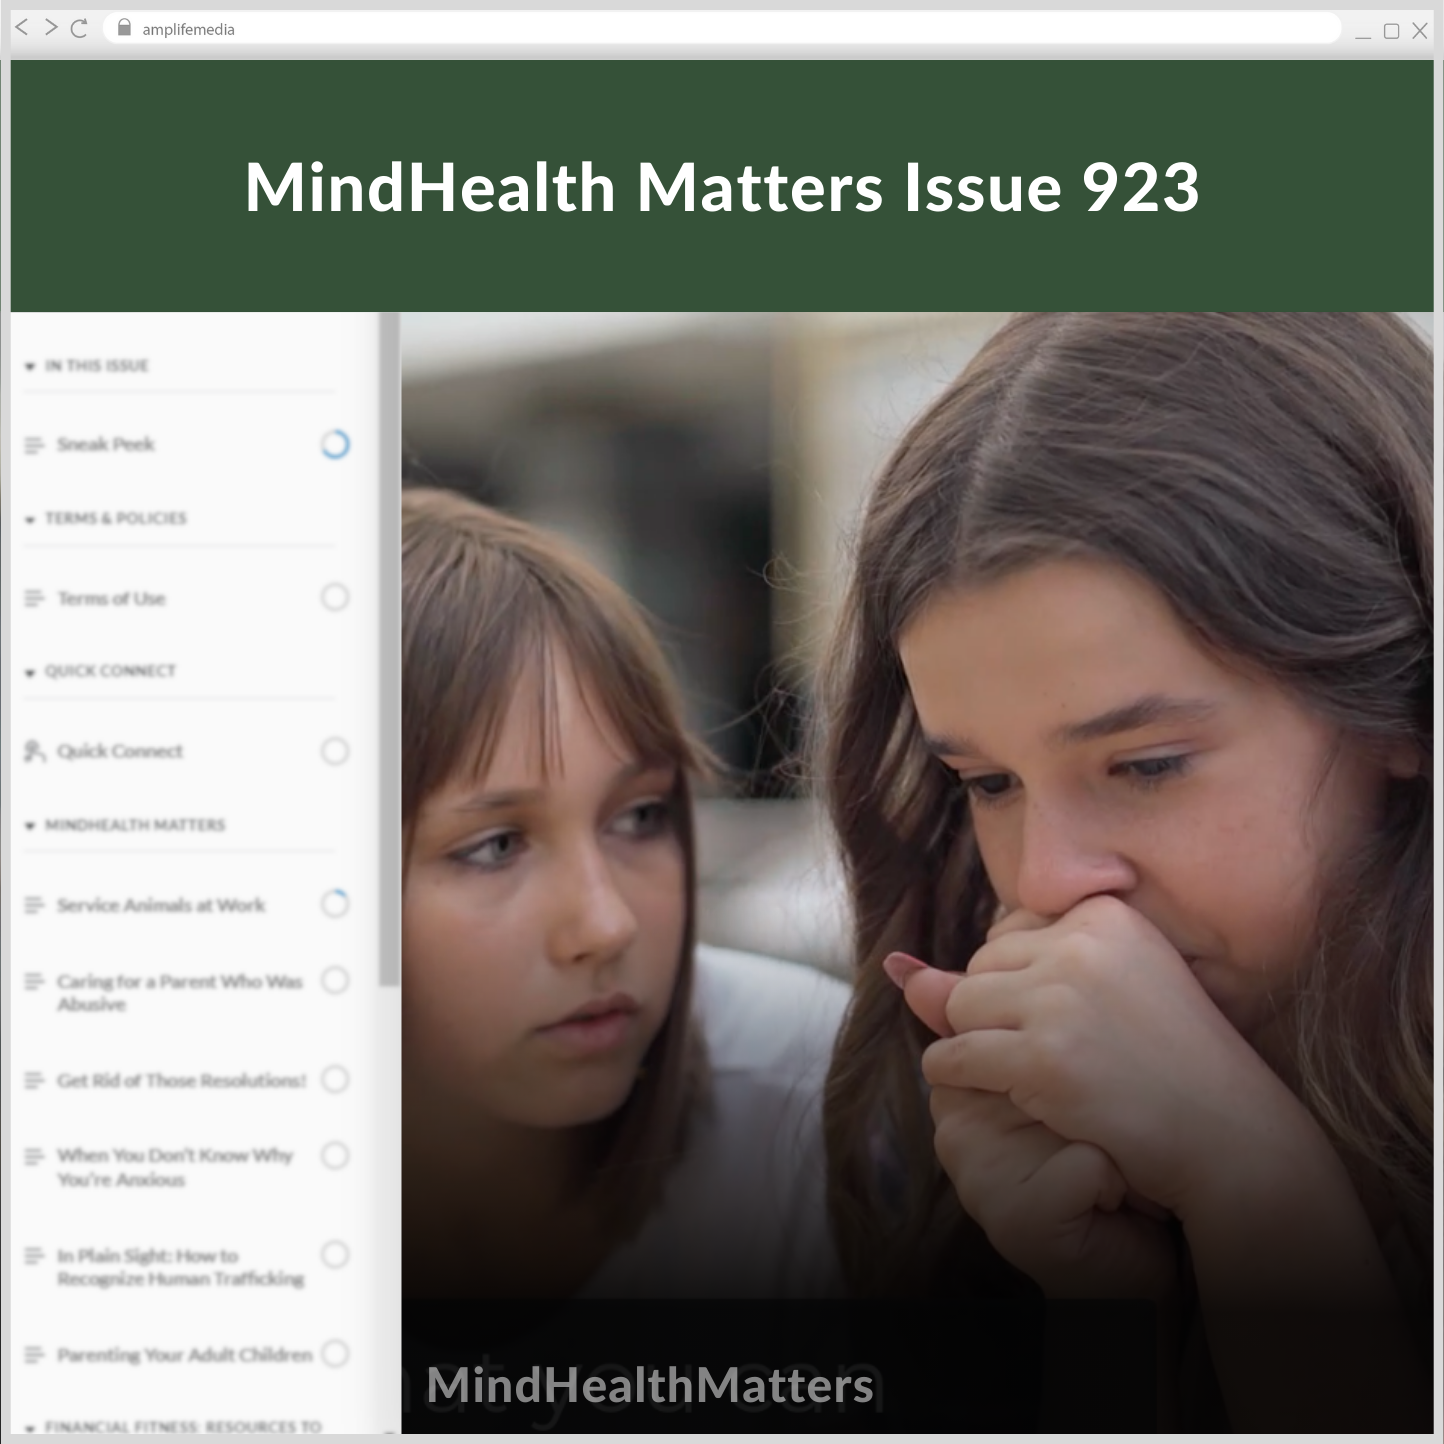 Subscription to Wellbeing Media: MindHealth Matters 923